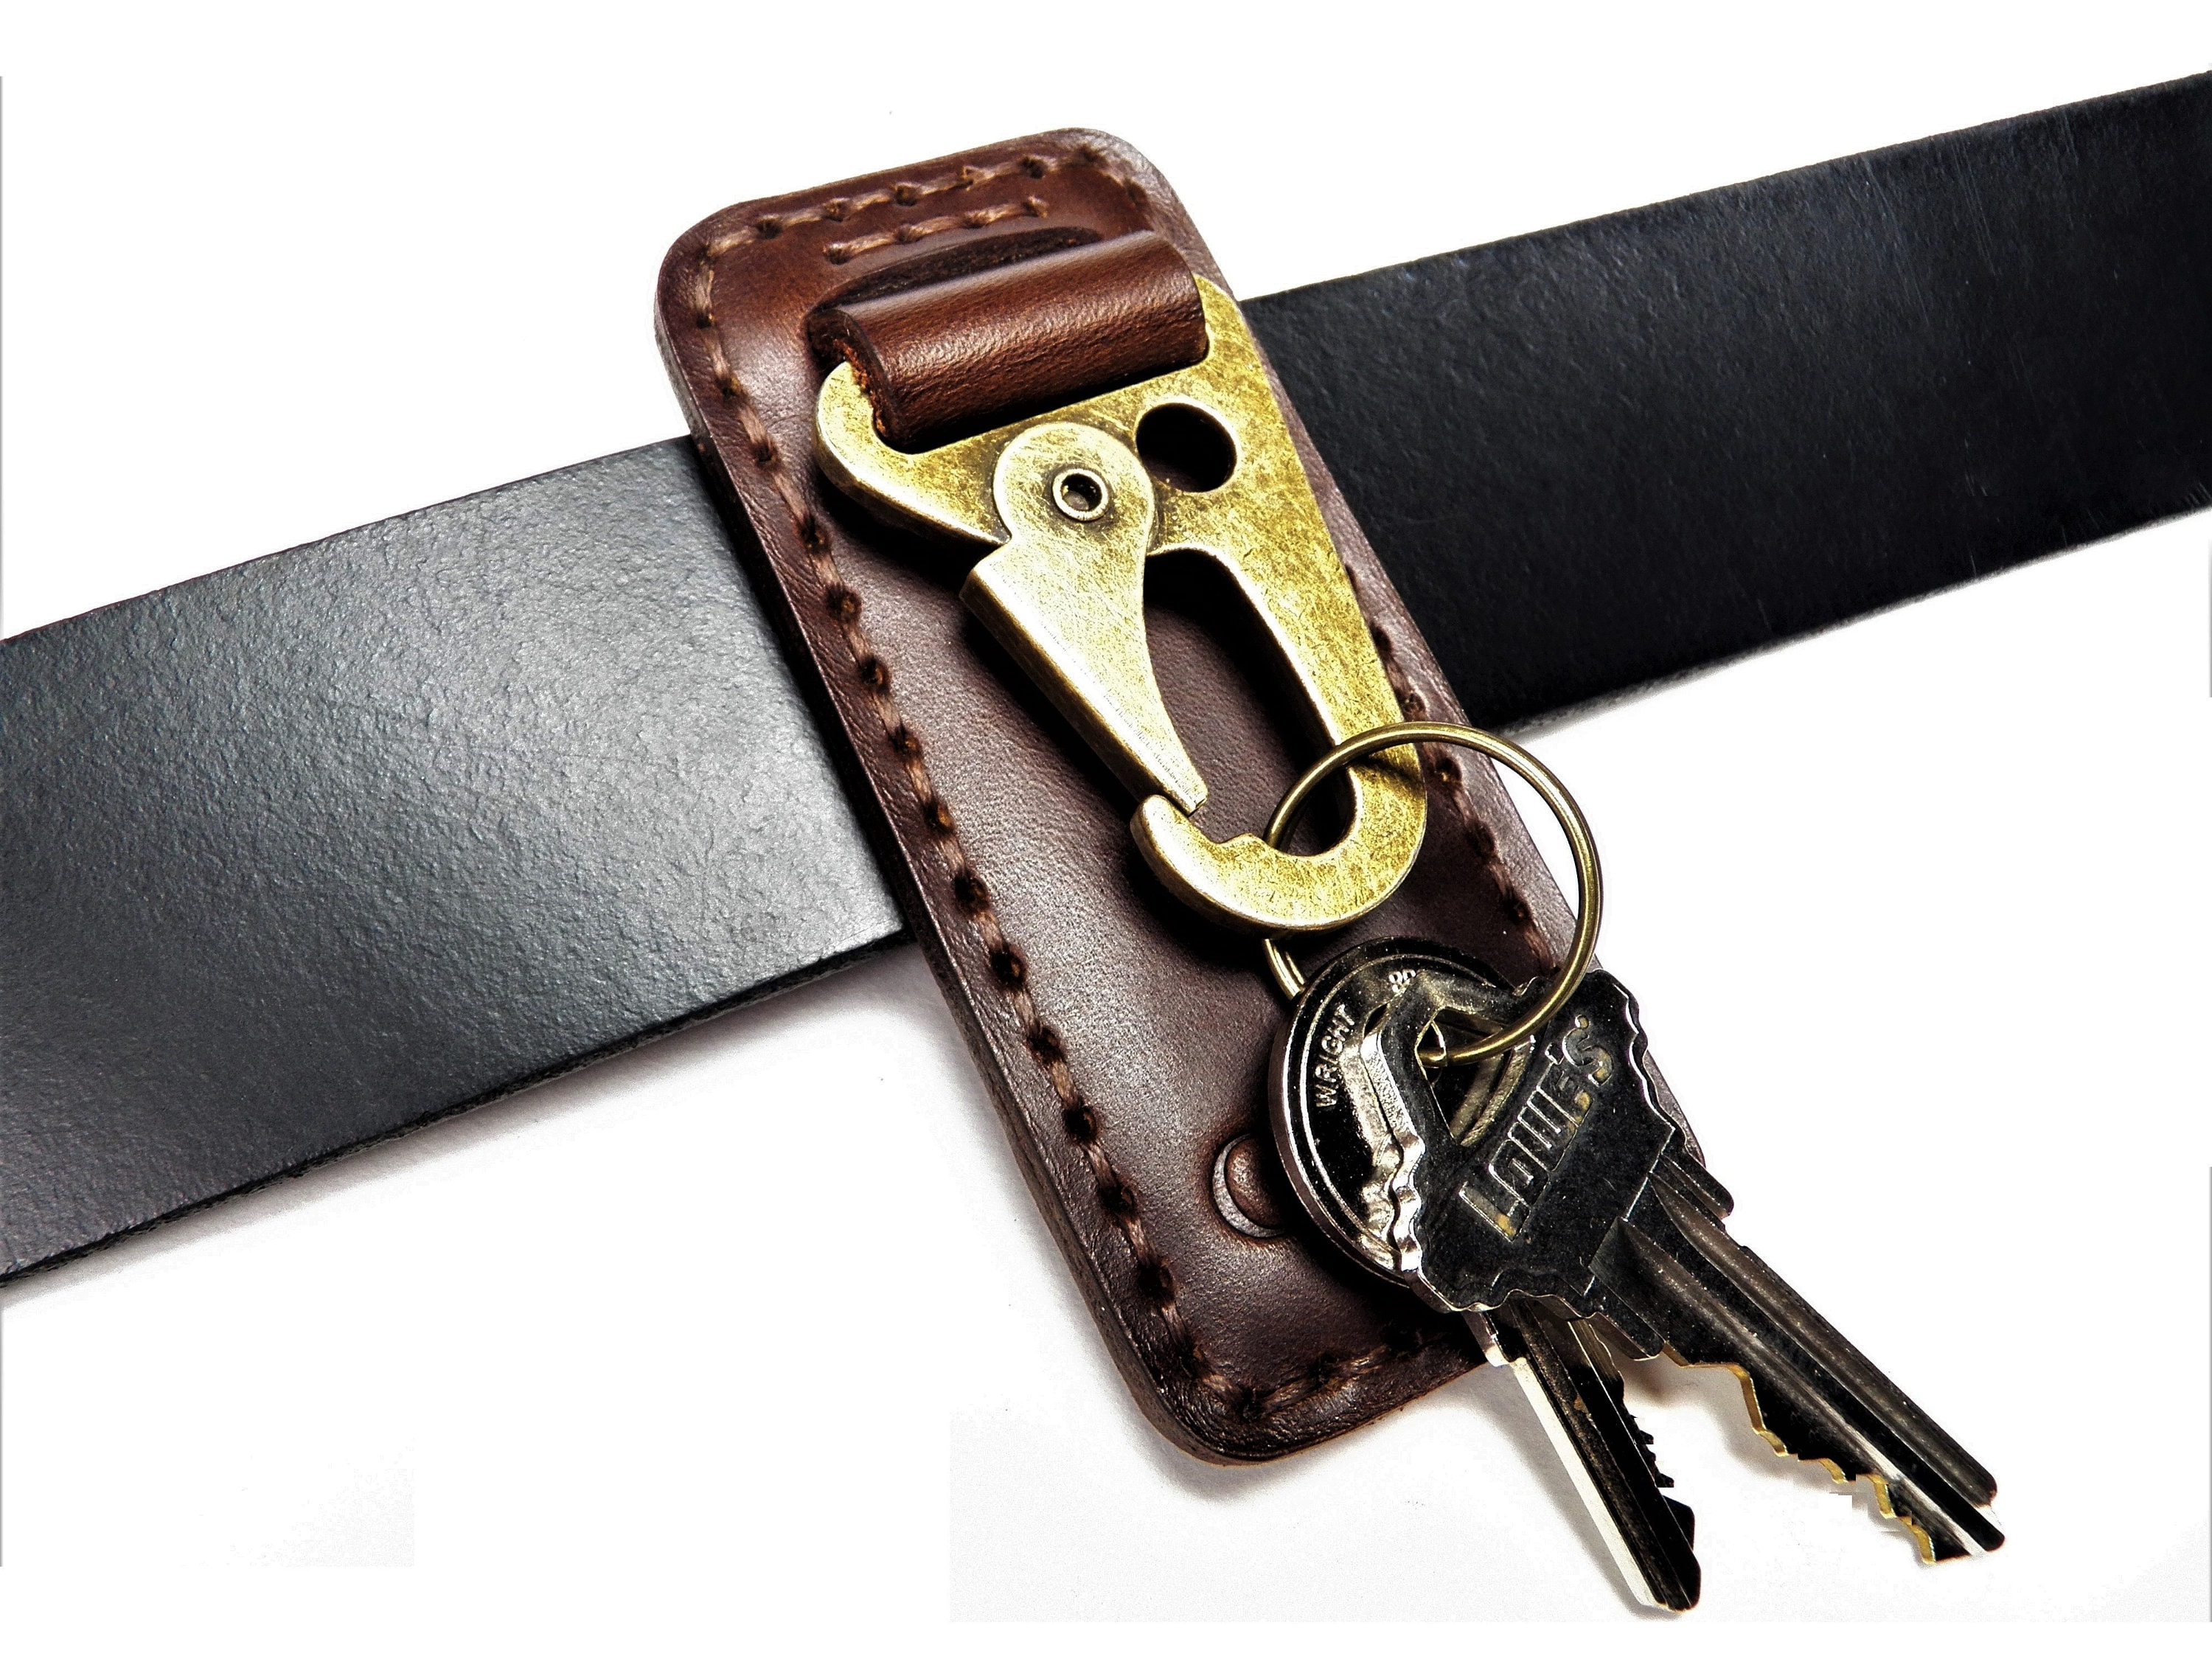 K017 Key Chain Handmade Genuine Leather Car Home Key Ring Strap Holder with  Belt Loop Clip for Keys, Size L - Coffee Wholesale